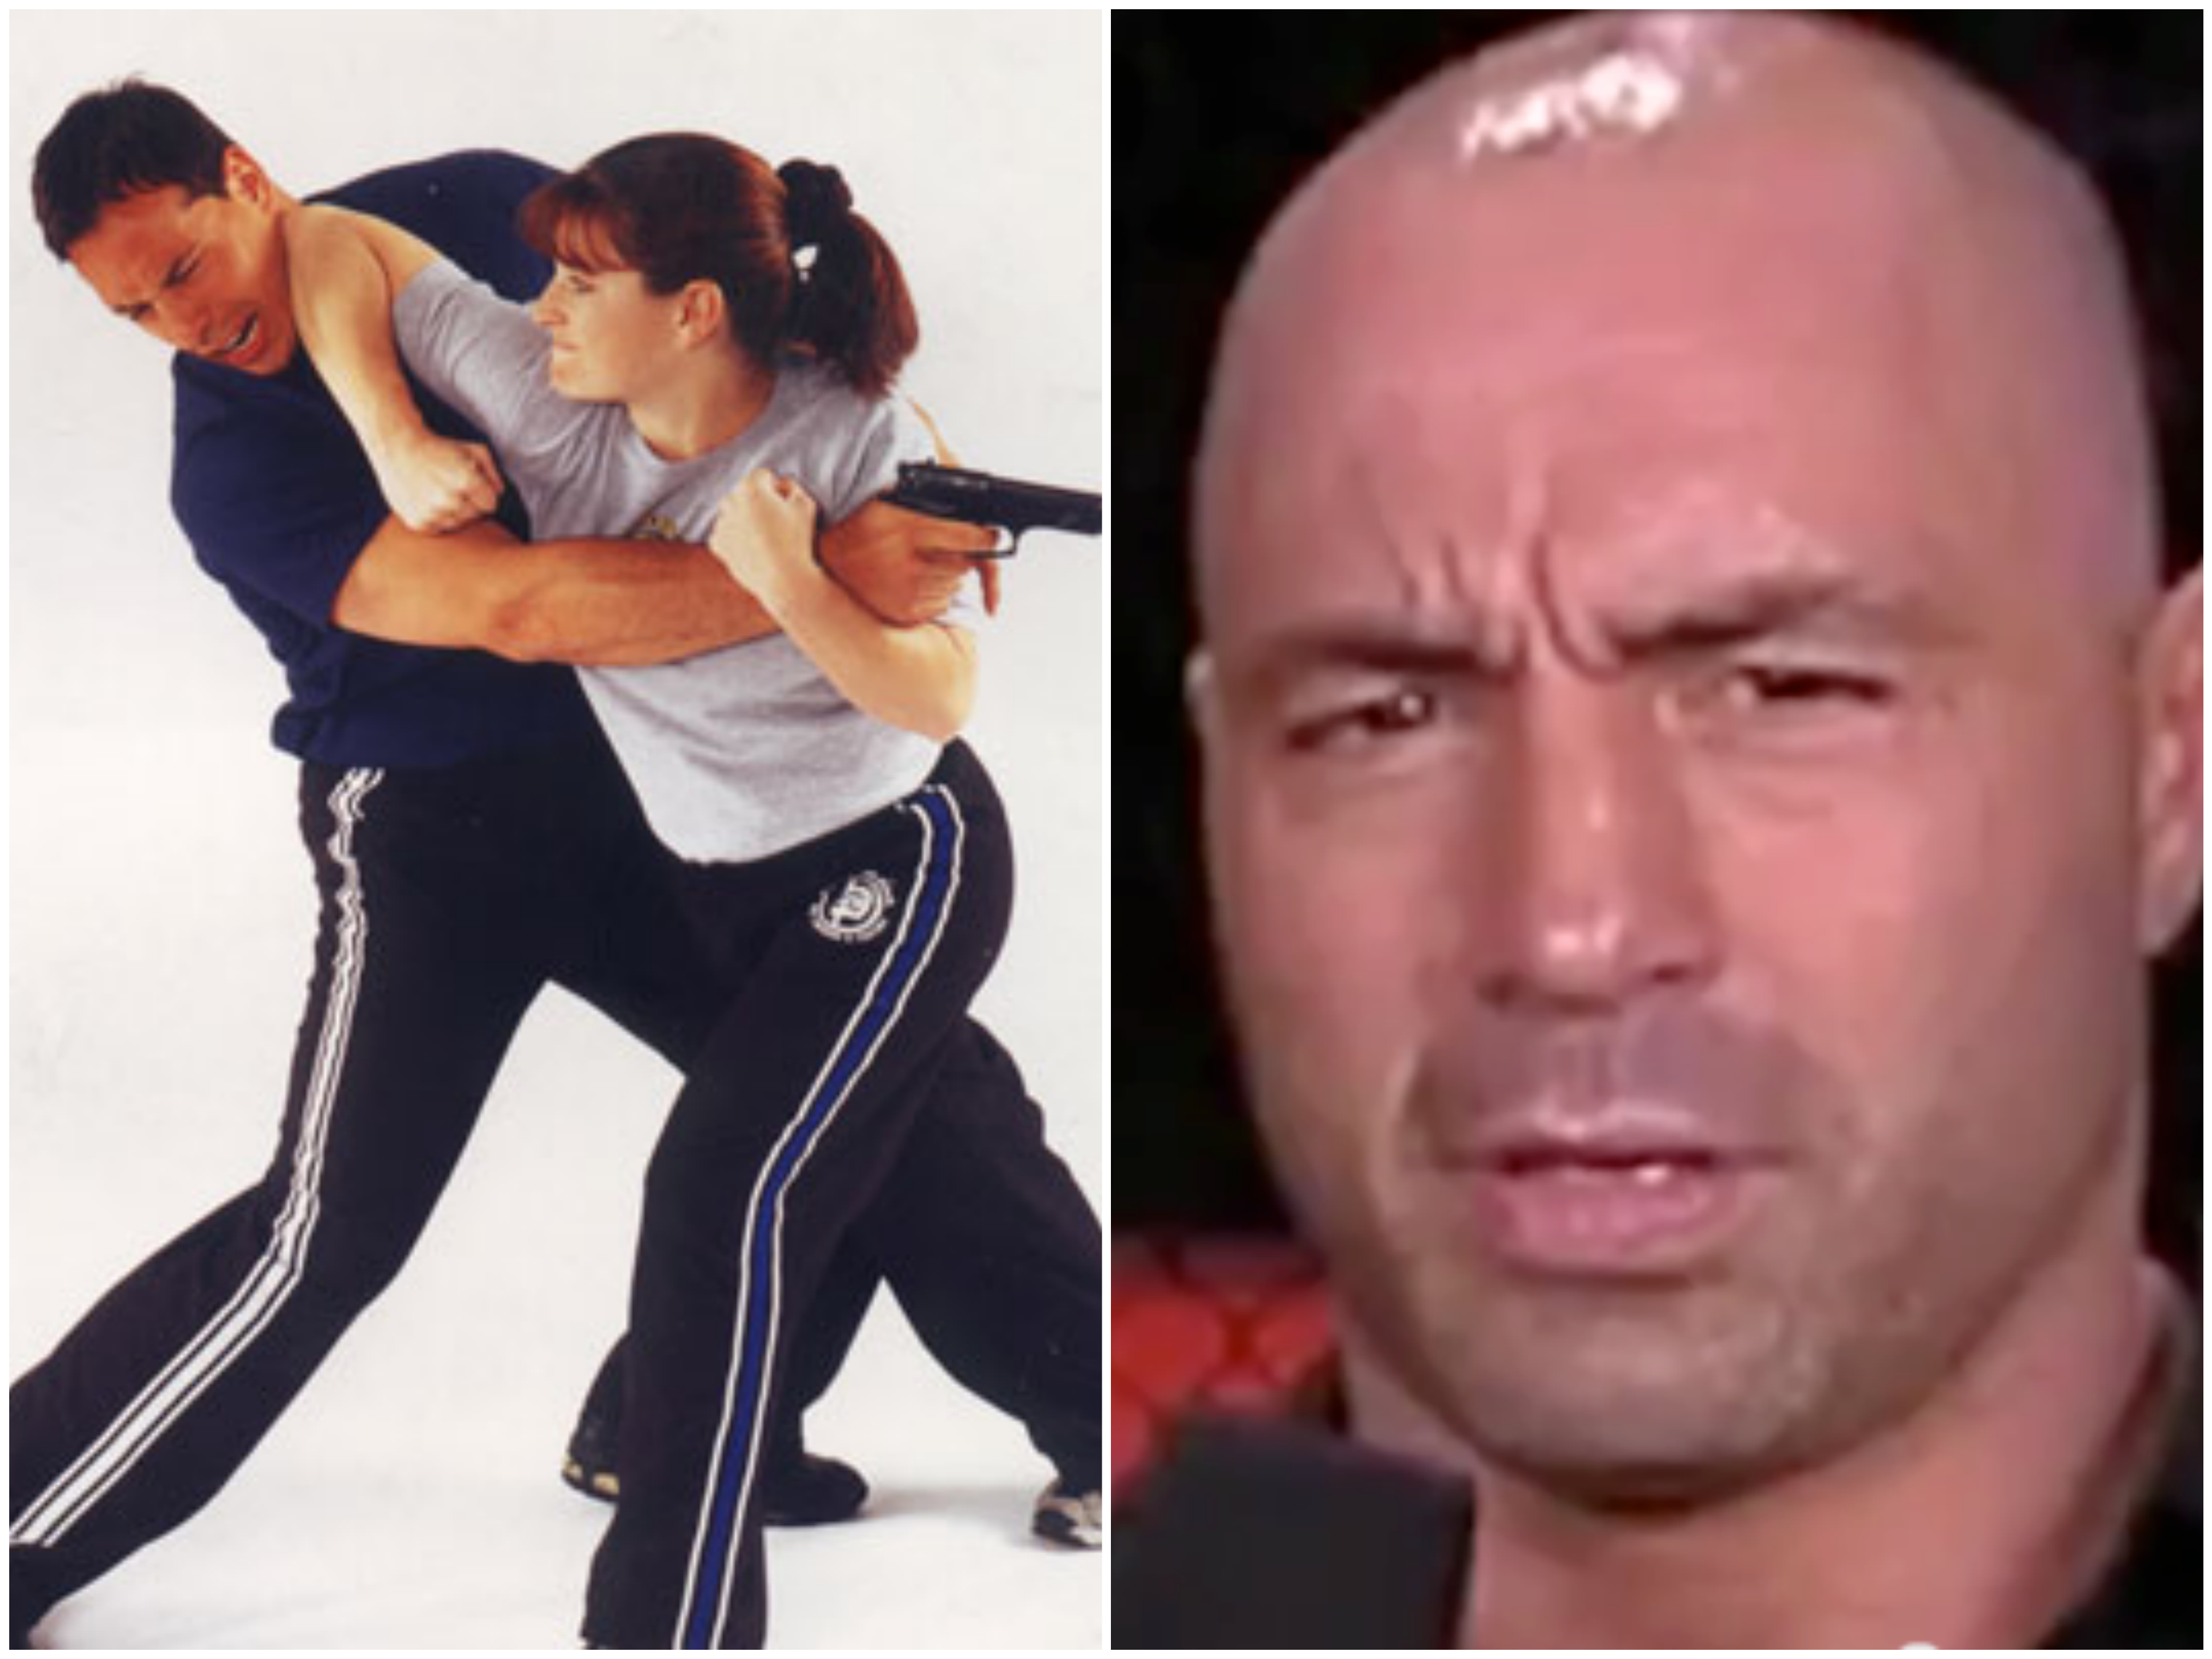 Joe Rogan On Krav Maga: ‘The Best Martial Arts Are the ones that Work on Other Martial Artists, not Just on Untrained People’